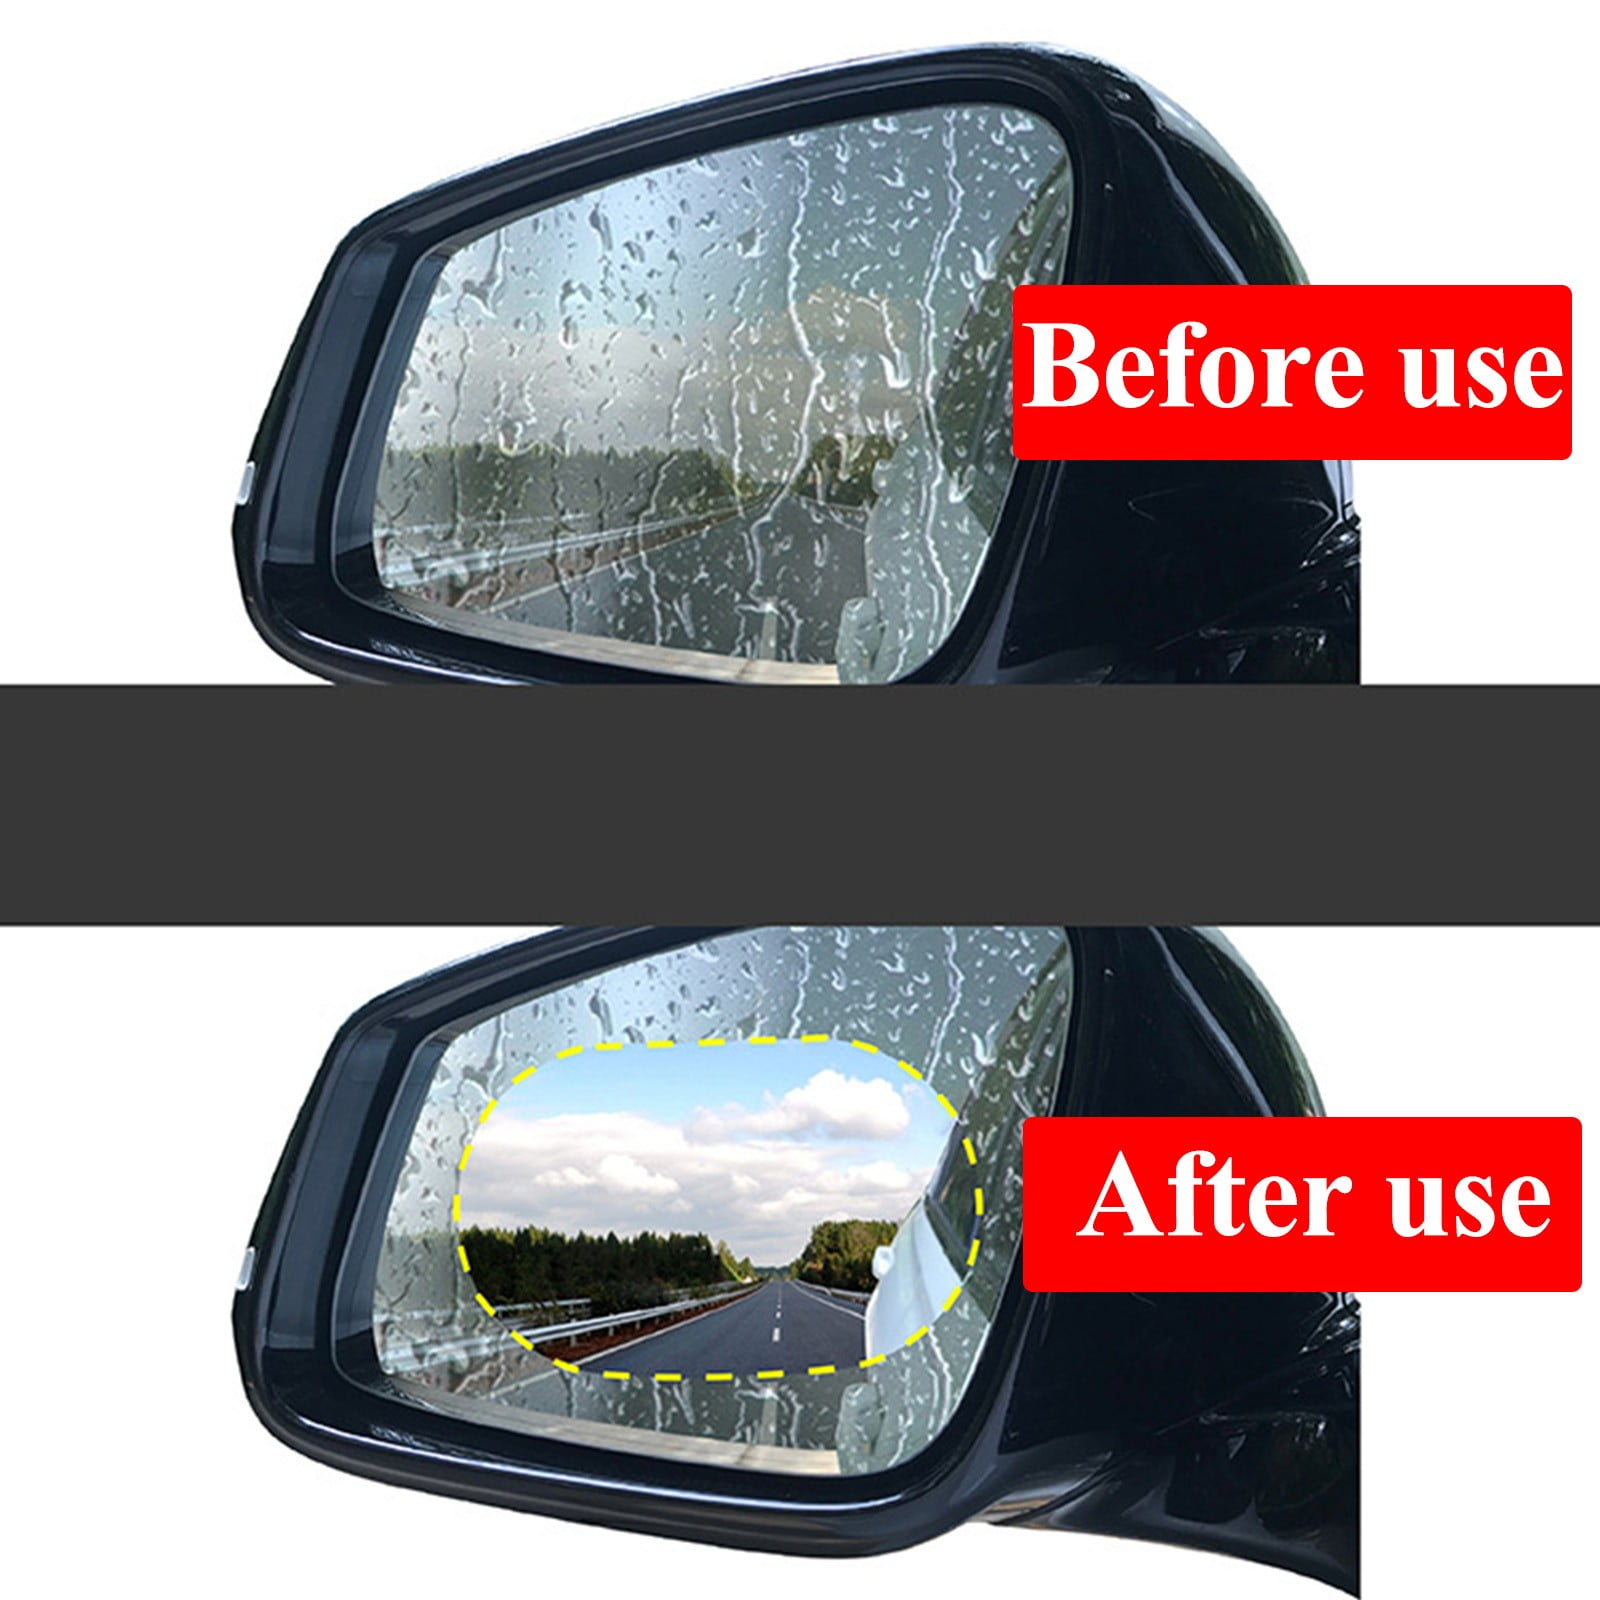 Ykohkofe Pcs Car Rearview Film Rainproof Waterproof Film Fog HD Clear  Nano Coating Car Film For Car Mirrors And Side Windows Oval Shapes Stickers  Cool Things for Cars Fiber Wire Light